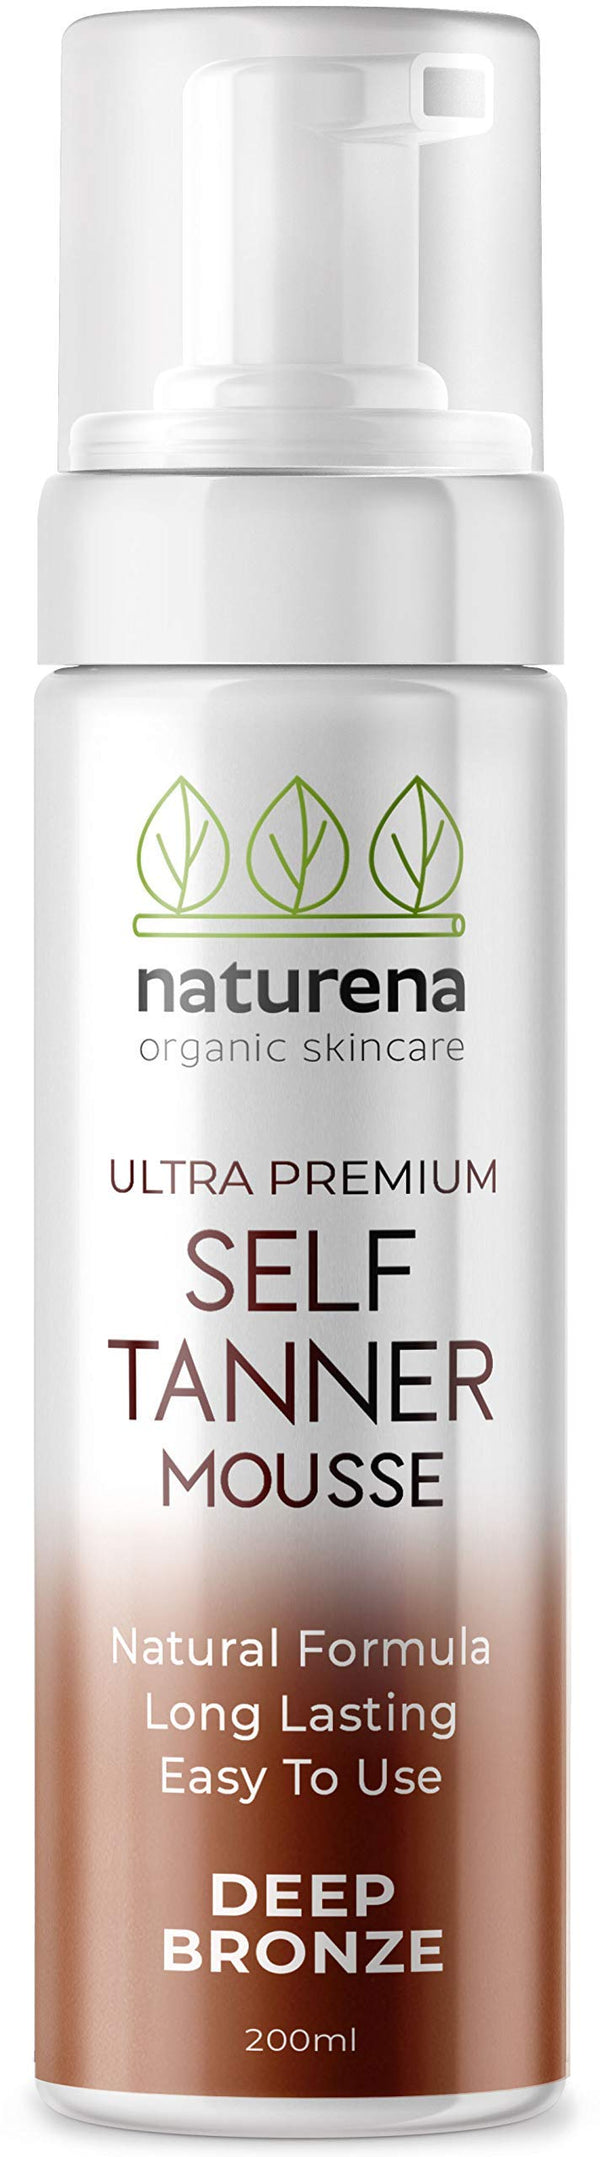 Naturena Self Tanner Tanning Mousse with Organic & Natural Ingredients, Tanning Lotion, Sunless Tanning Lotion for Darker Bronzer Skin, 6.7 Fl Oz